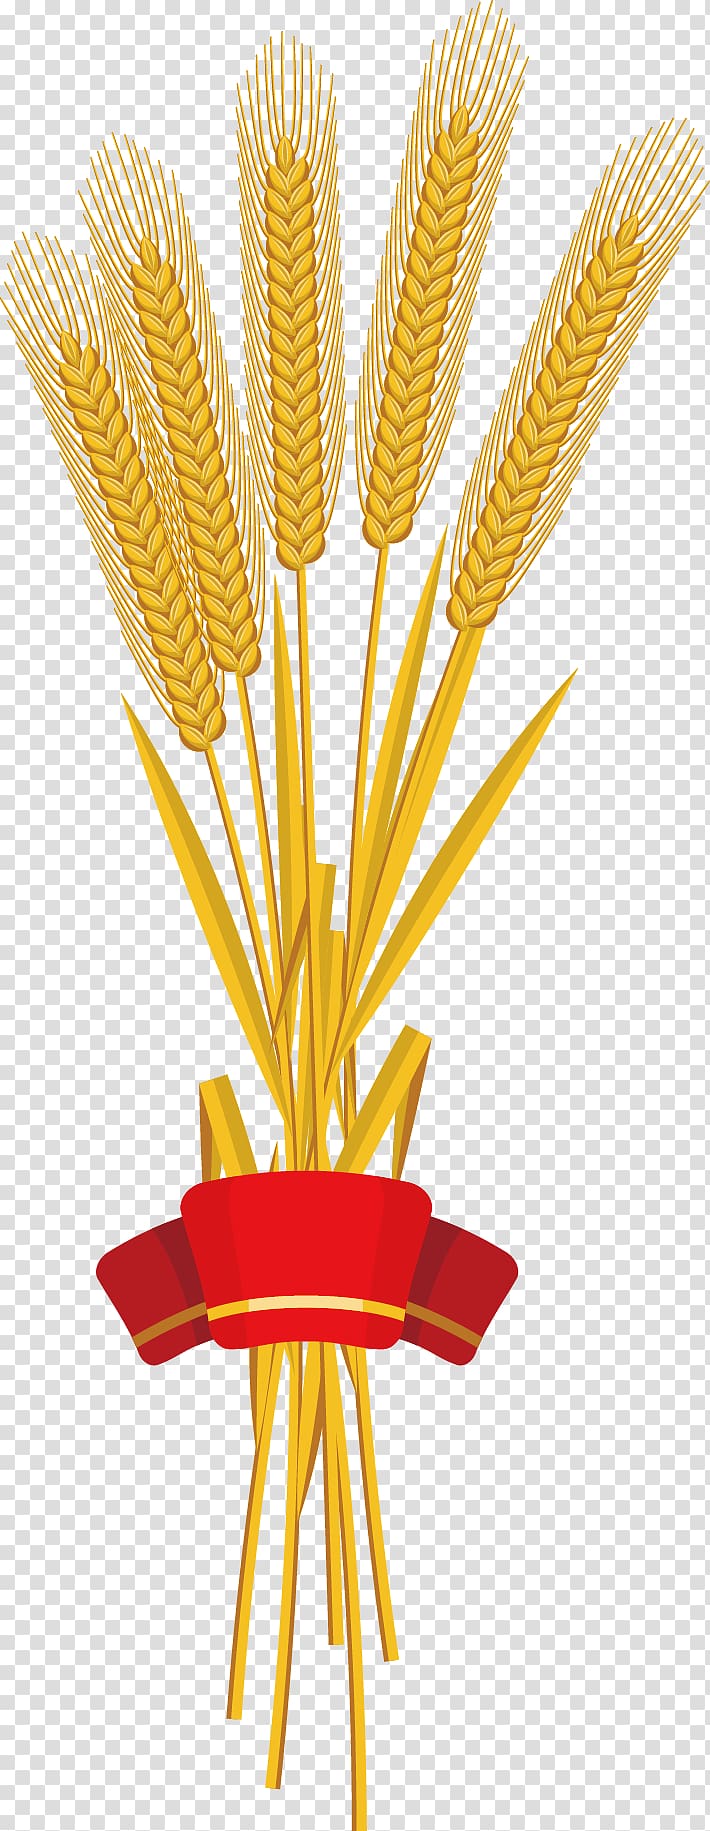 Red ribbon Wheat, Red ribbon wheat harvest transparent background PNG clipart